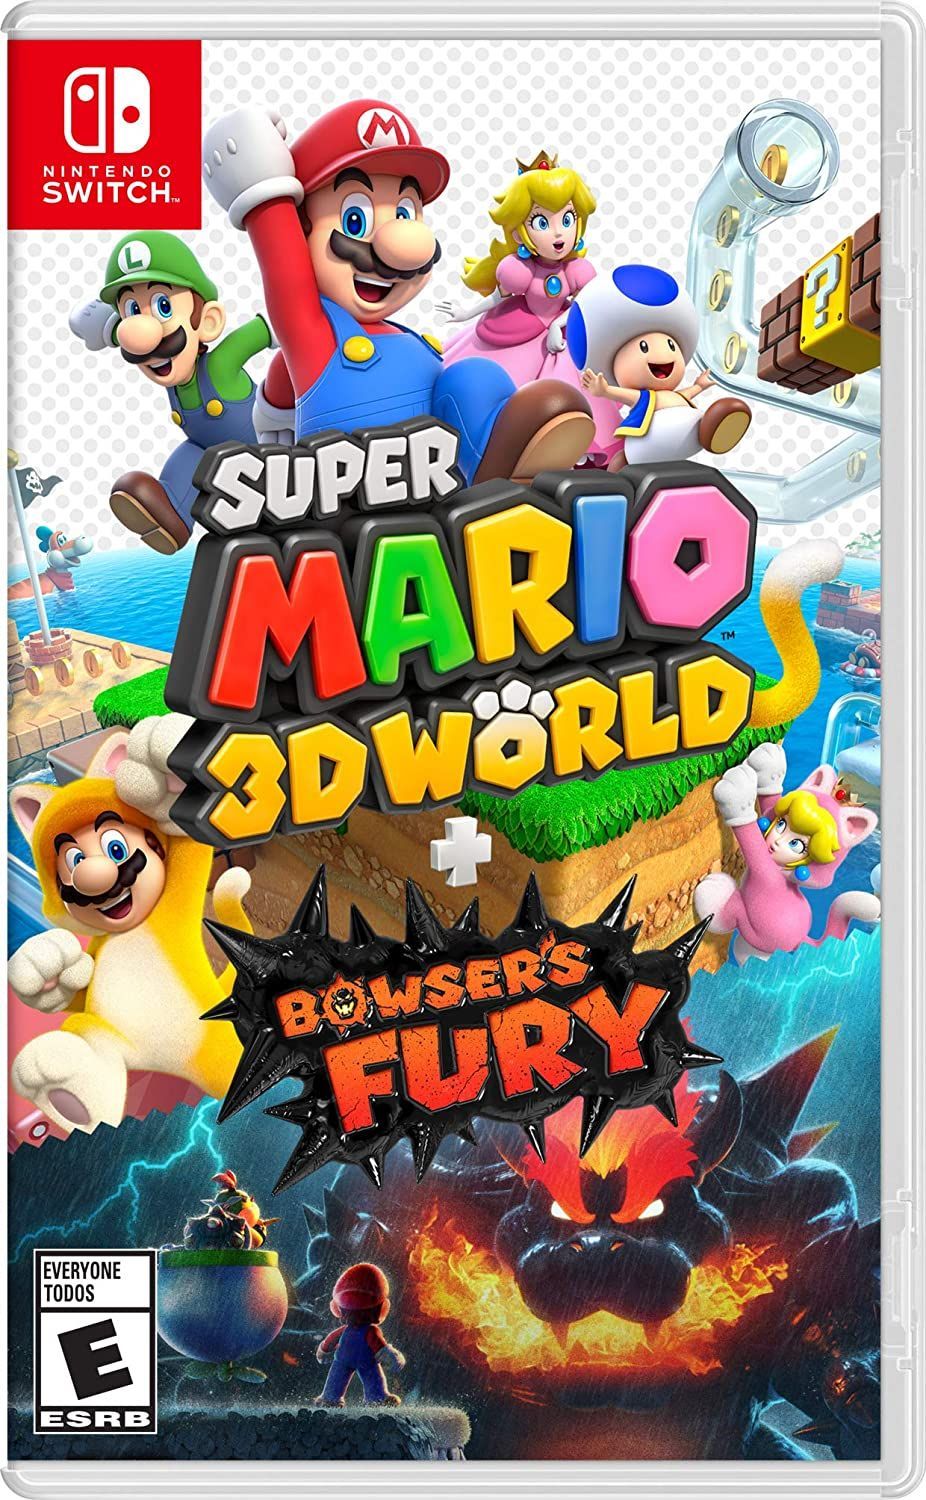 Bowser S Fury Makes Super Mario 3d World A Great Nintendo Game Review - mario adventure game roblox